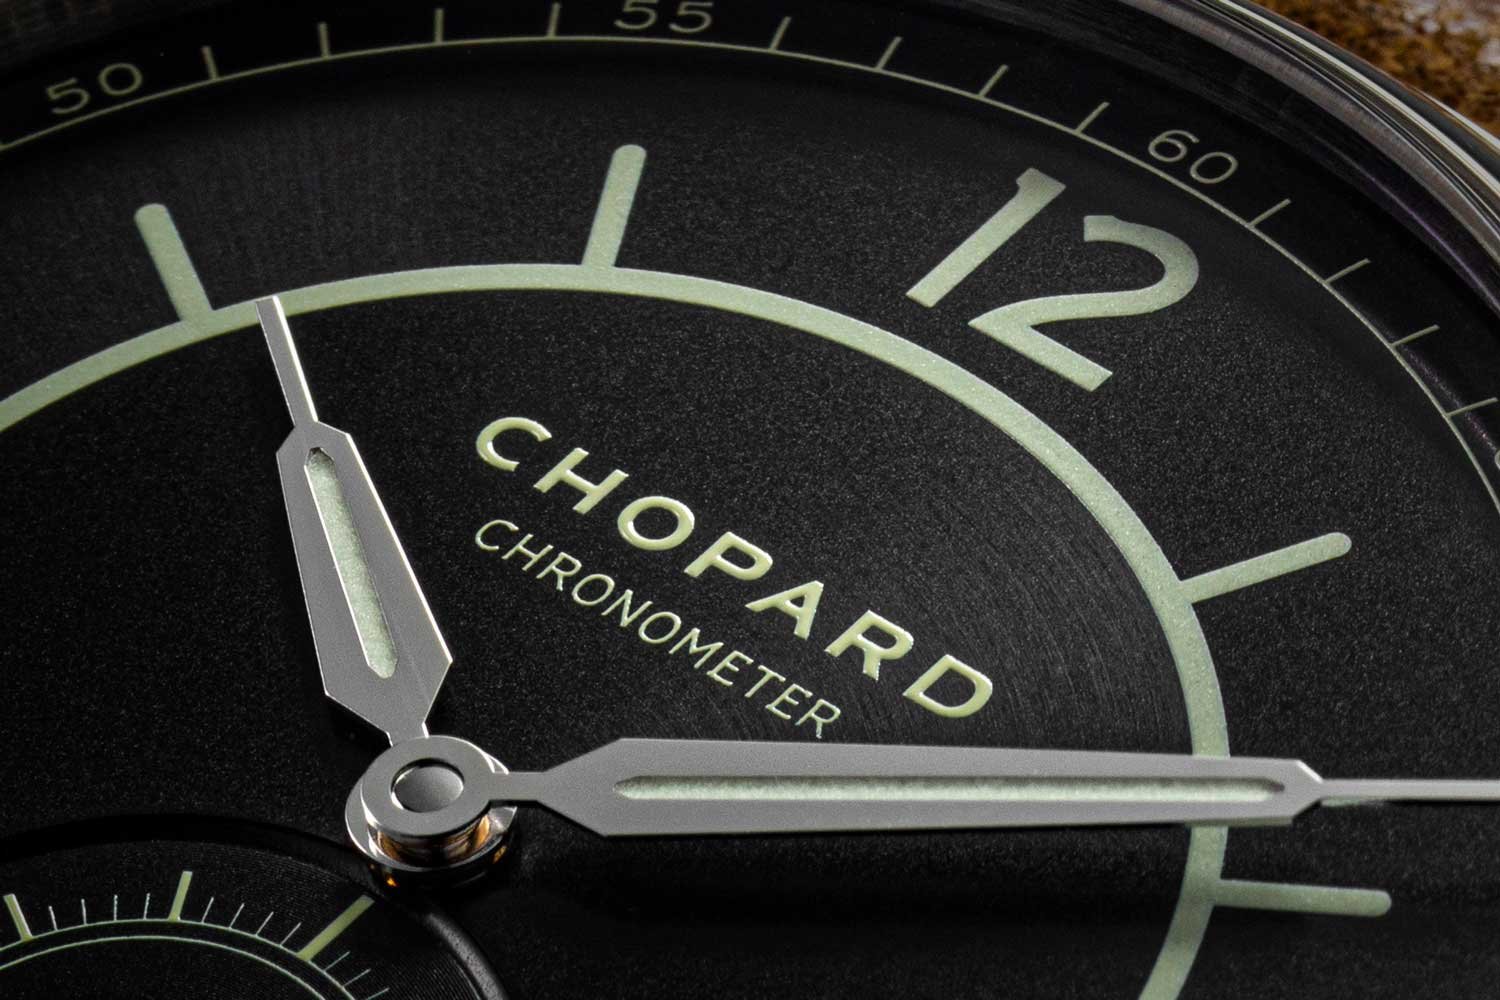 Chopard Unveils L.U.C QF Jubilee Watch For 25 Years Of Watchmaking